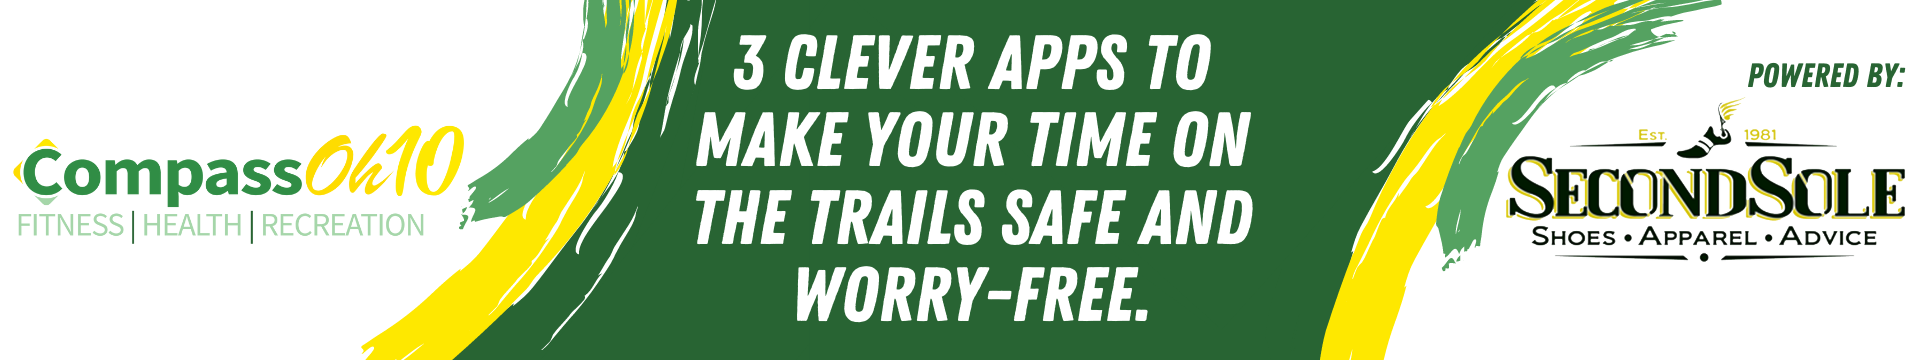 3 Clever Apps to Make Your Time on the Trails Safe and Worry-Free.